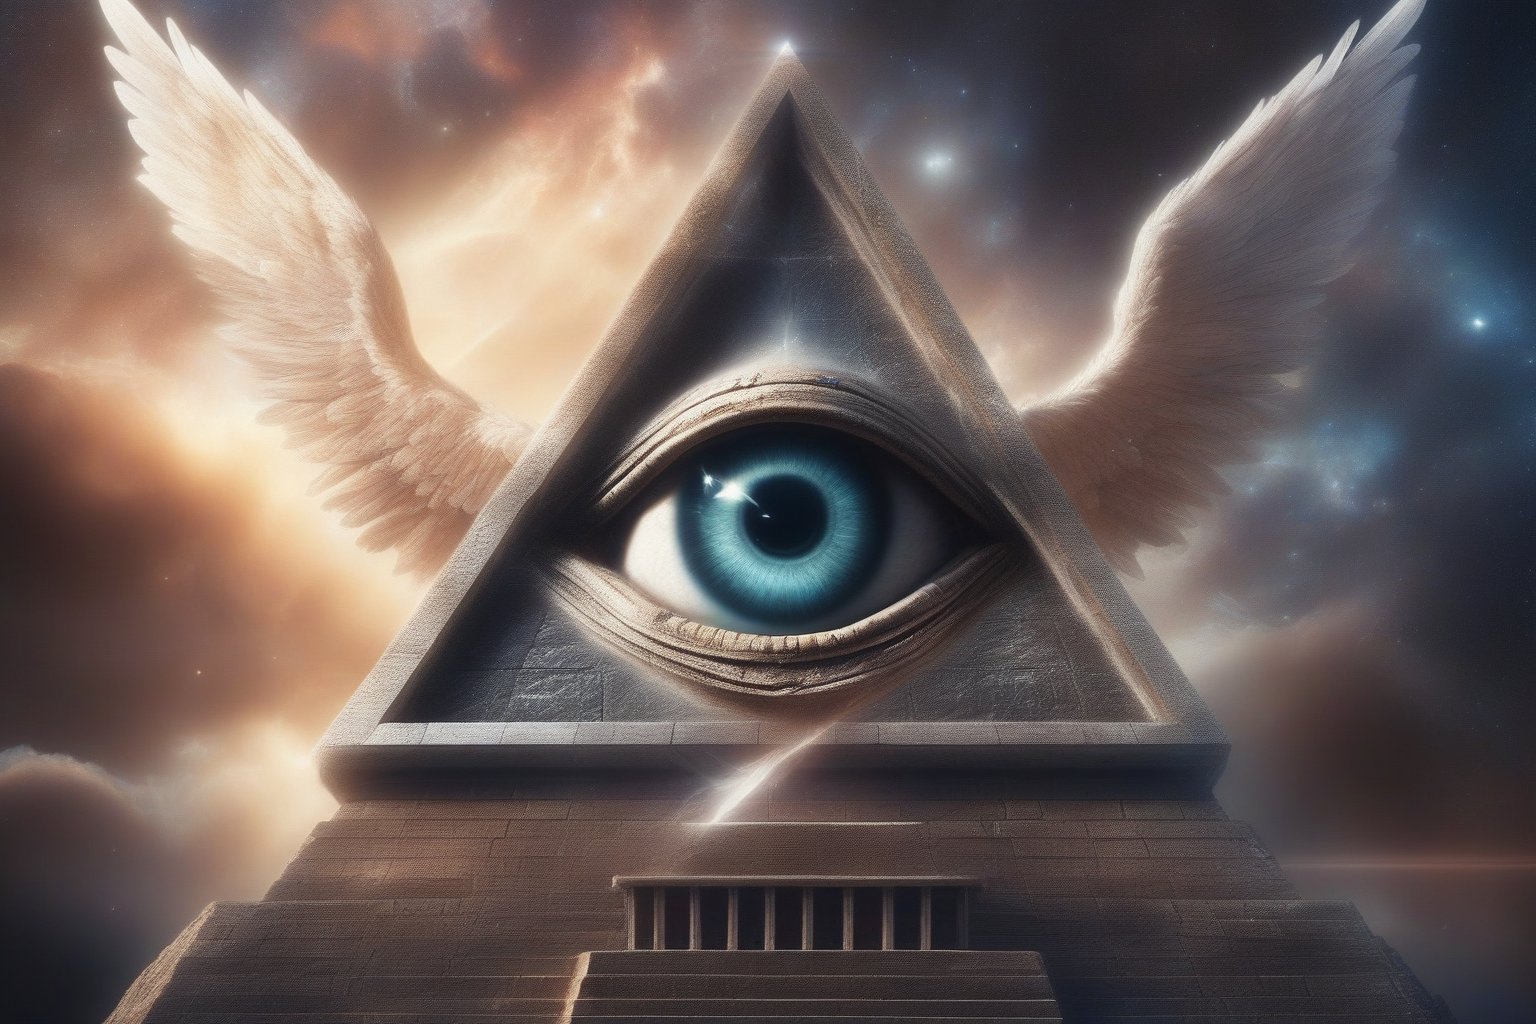 a hyper realistic picture of a illuminati eye in a pyramid form with angel wings, flying in the sky, space backdrop